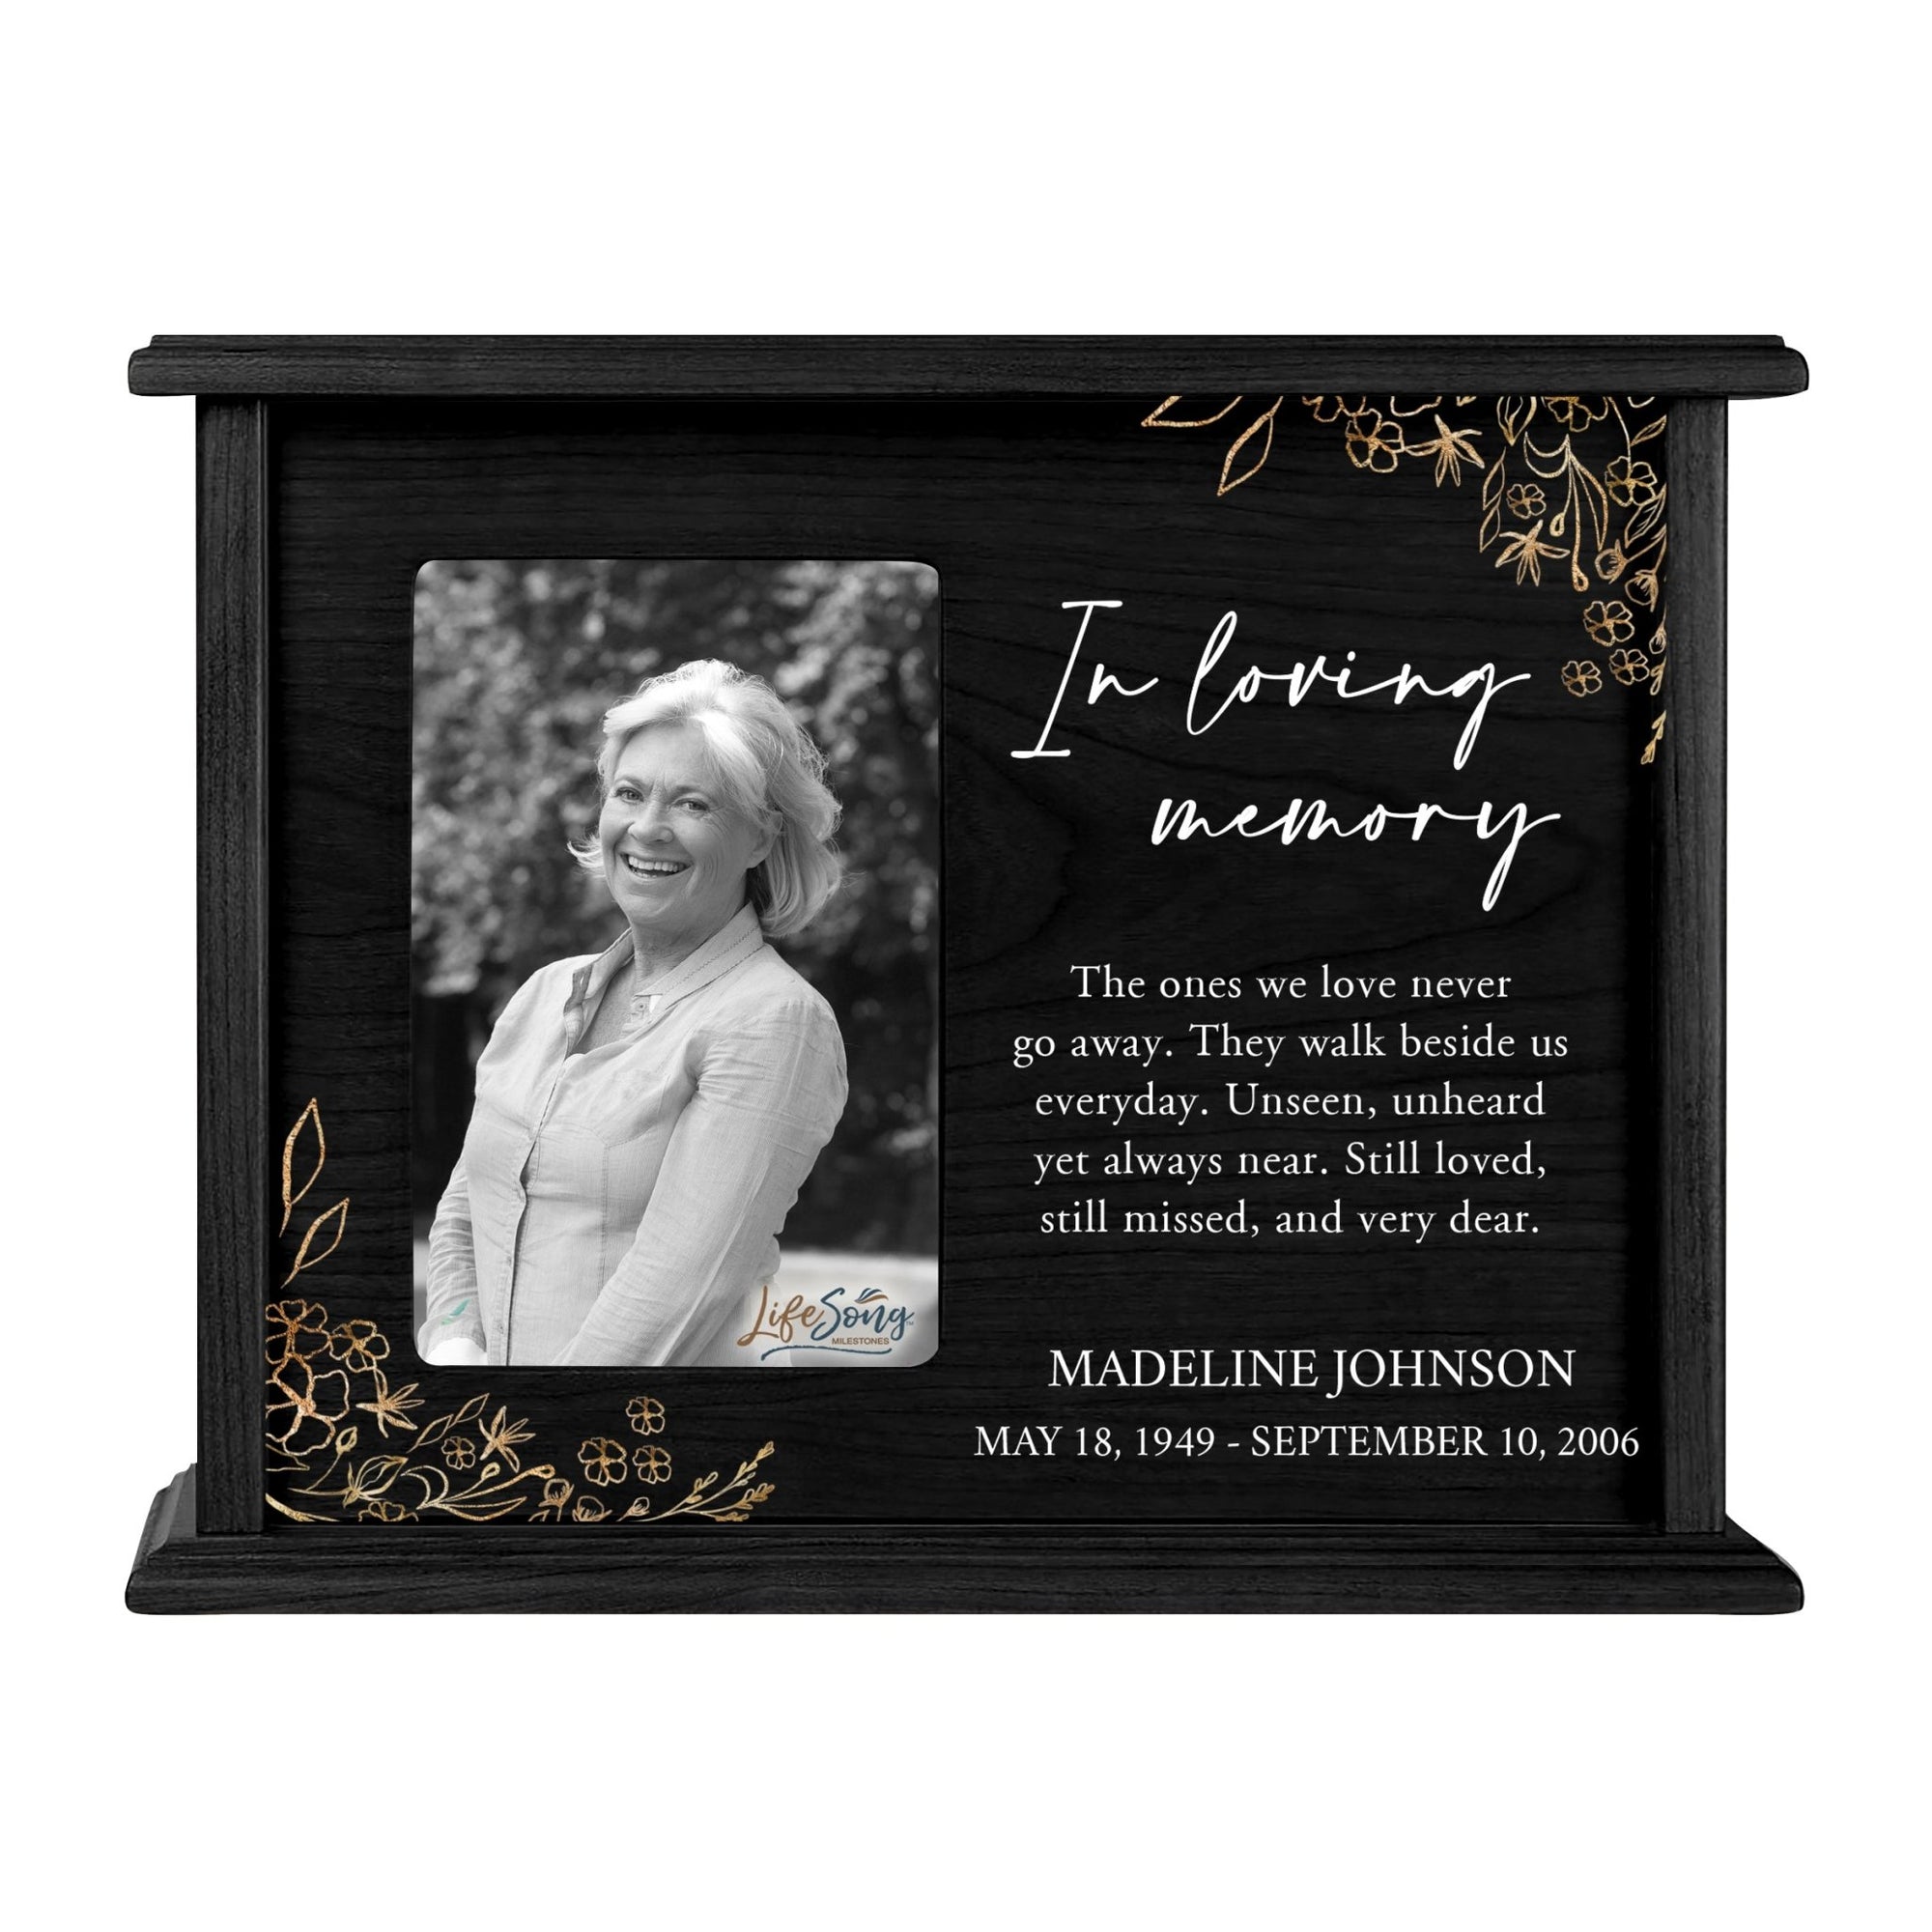 Personalized Memorial Cherry Wood 12 x 4.5 x 9 Cremation Urn Box with Picture Frame holds 200 cu in of Human Ashes and 4x6 Photo - In Loving Memory (Love) - LifeSong Milestones